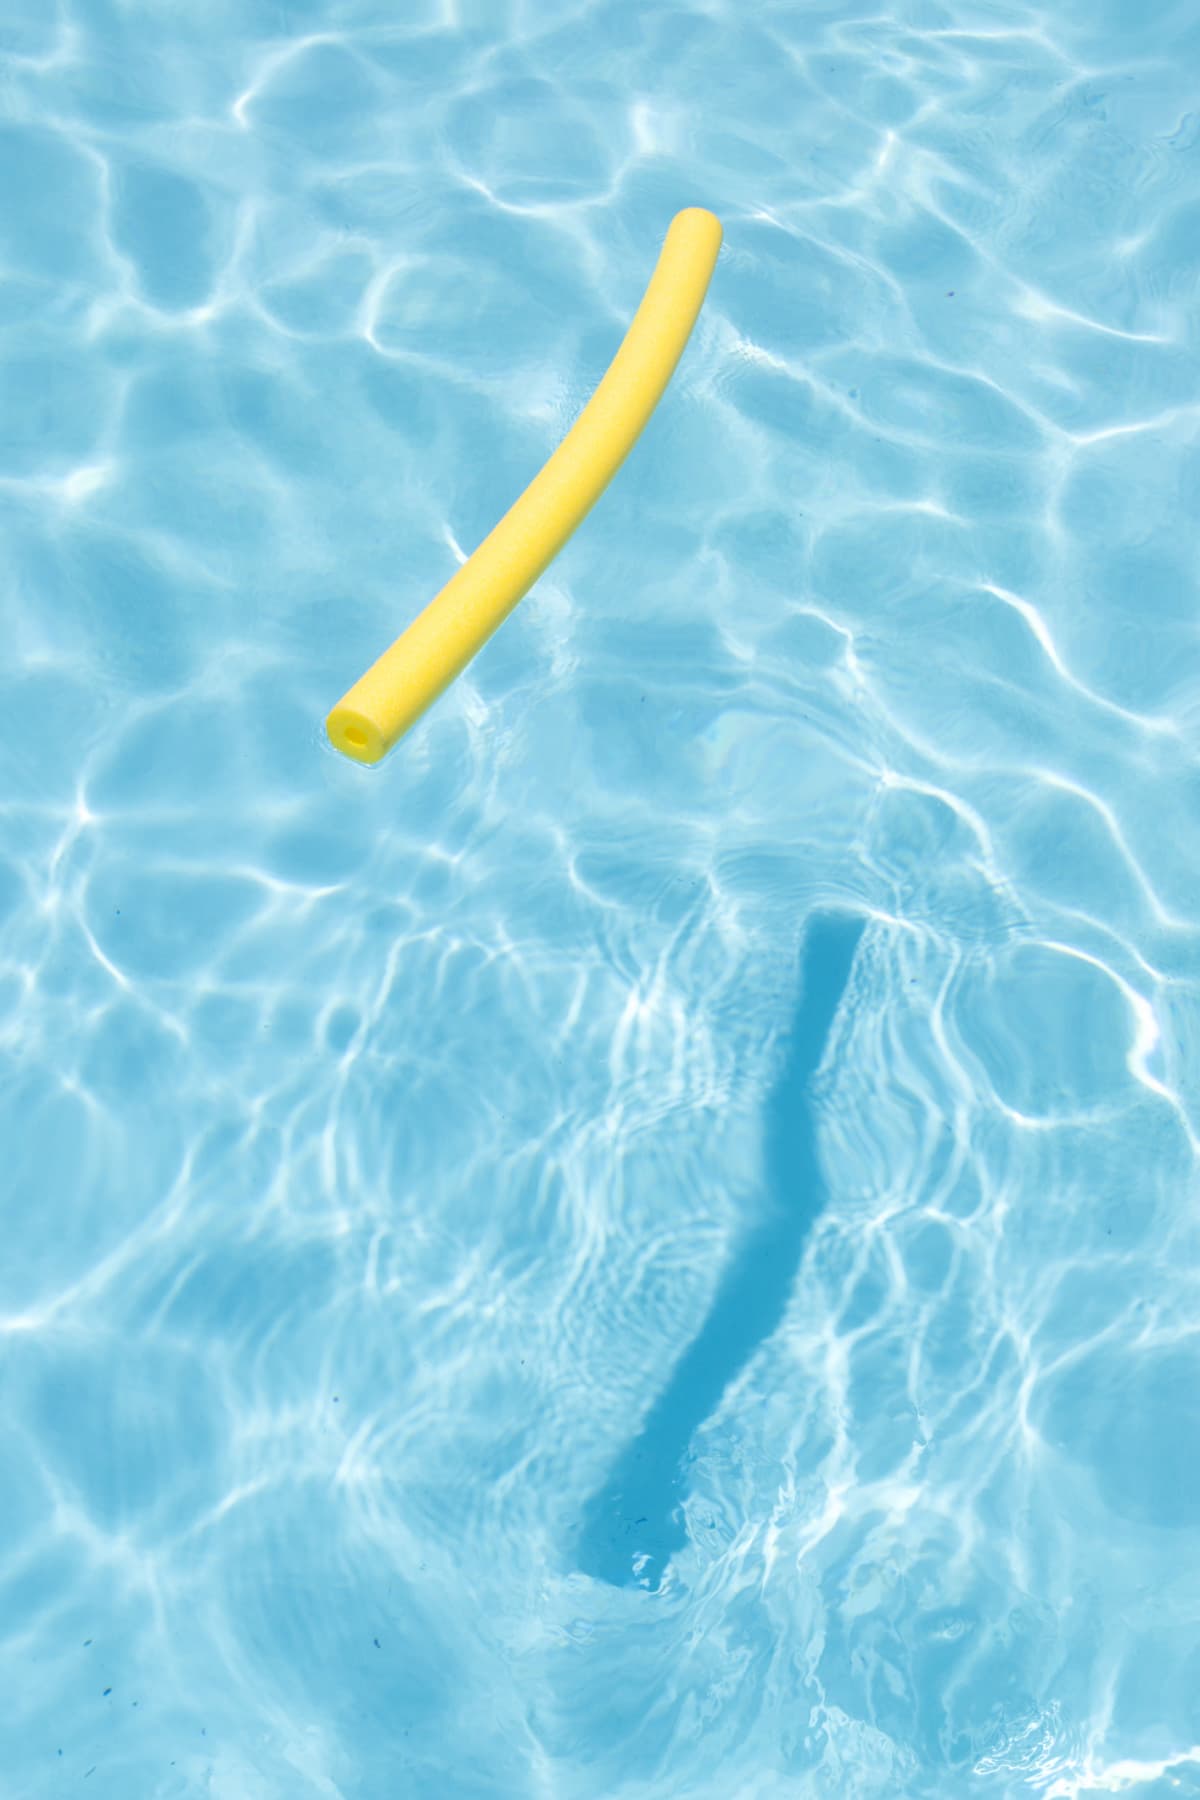 This bright yellow pool noodle is sitting on the surface of clear blue water in a swimming pool.